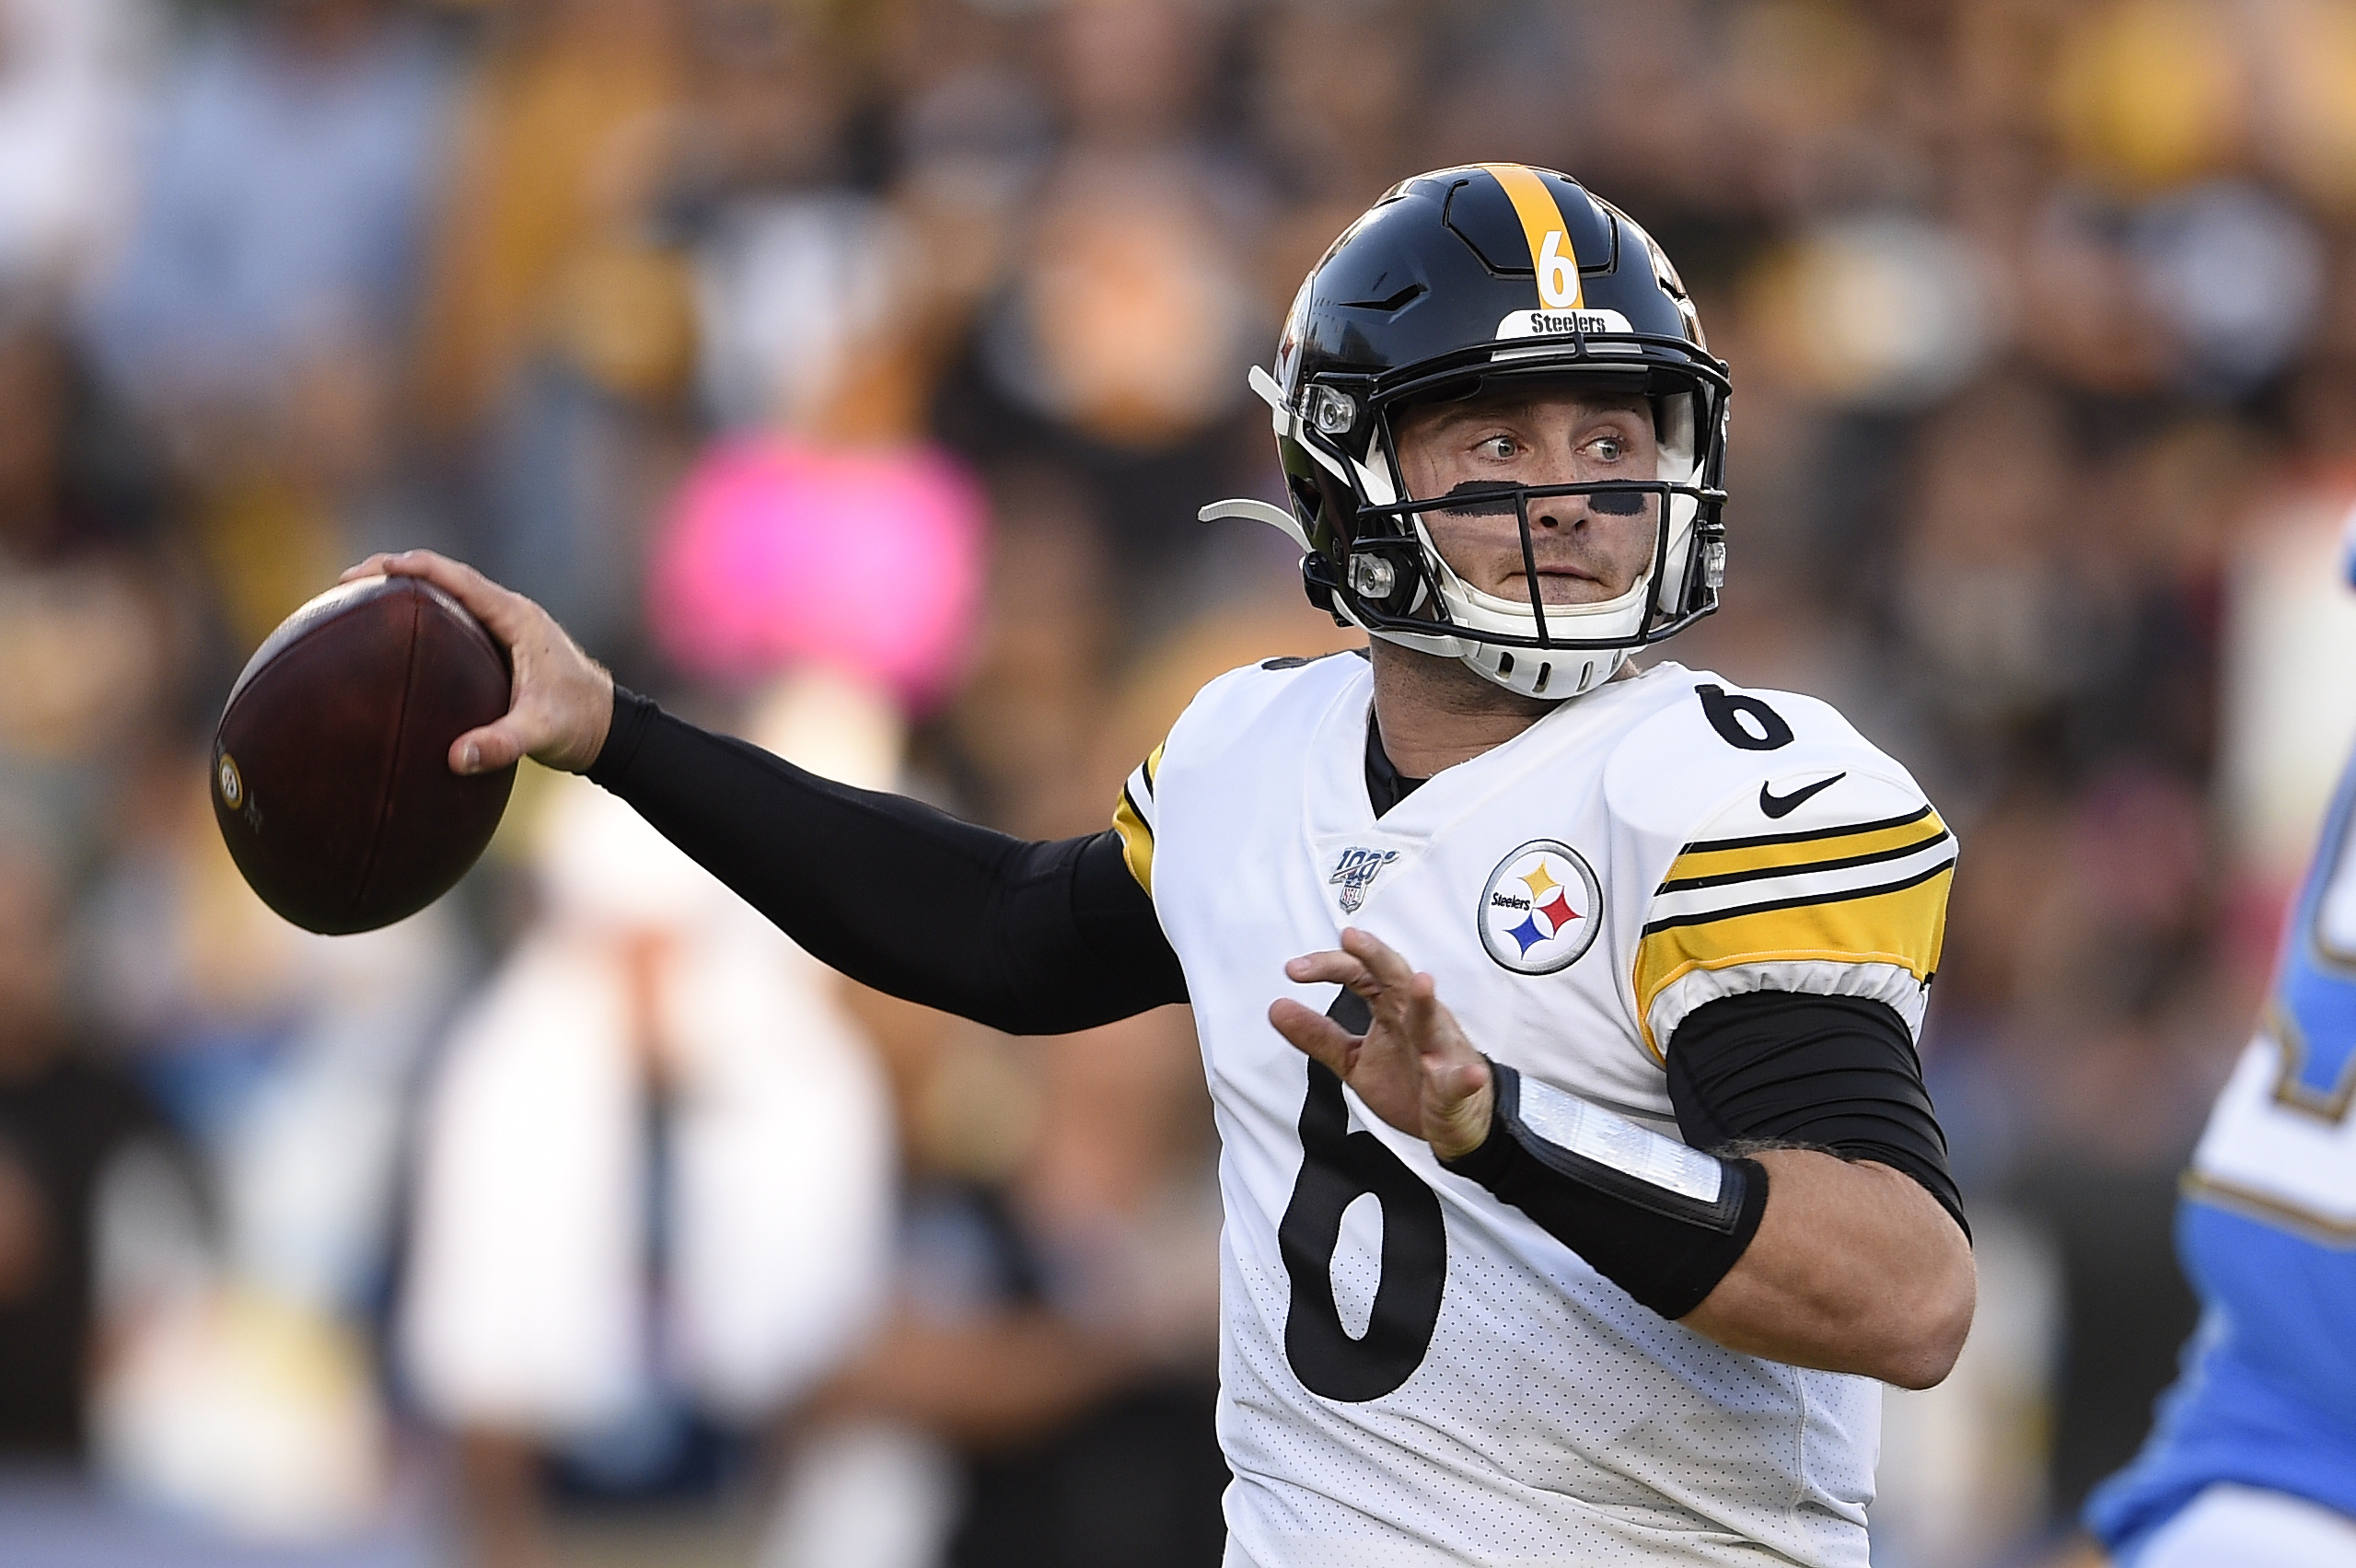 After West Coast win, Steelers ride depth, momentum into bye